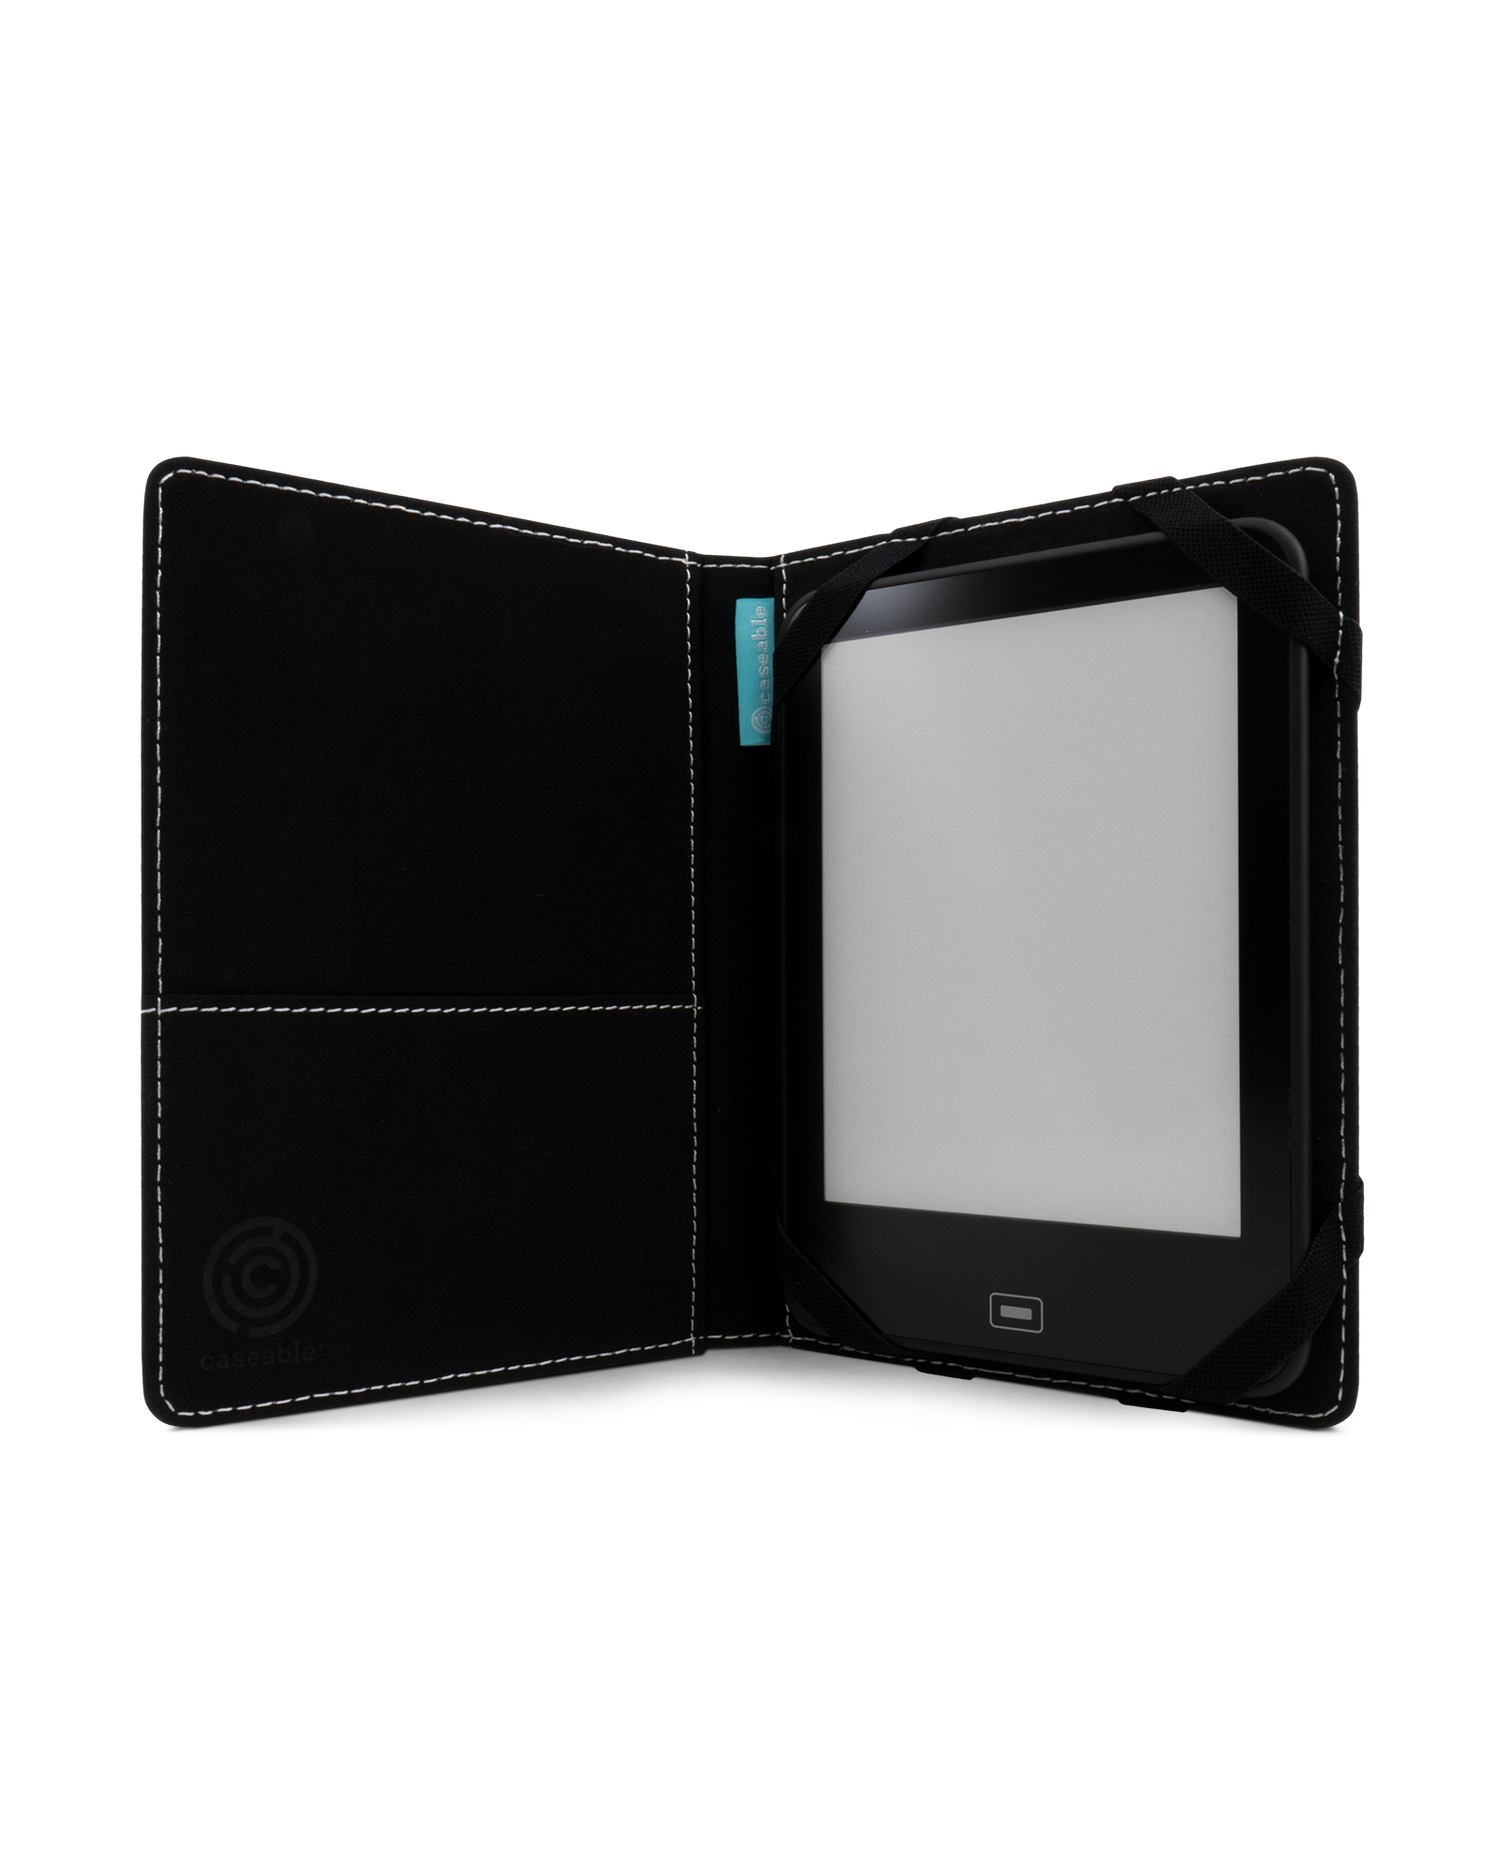 TURQUOISE eReader Case S: Opened interior view